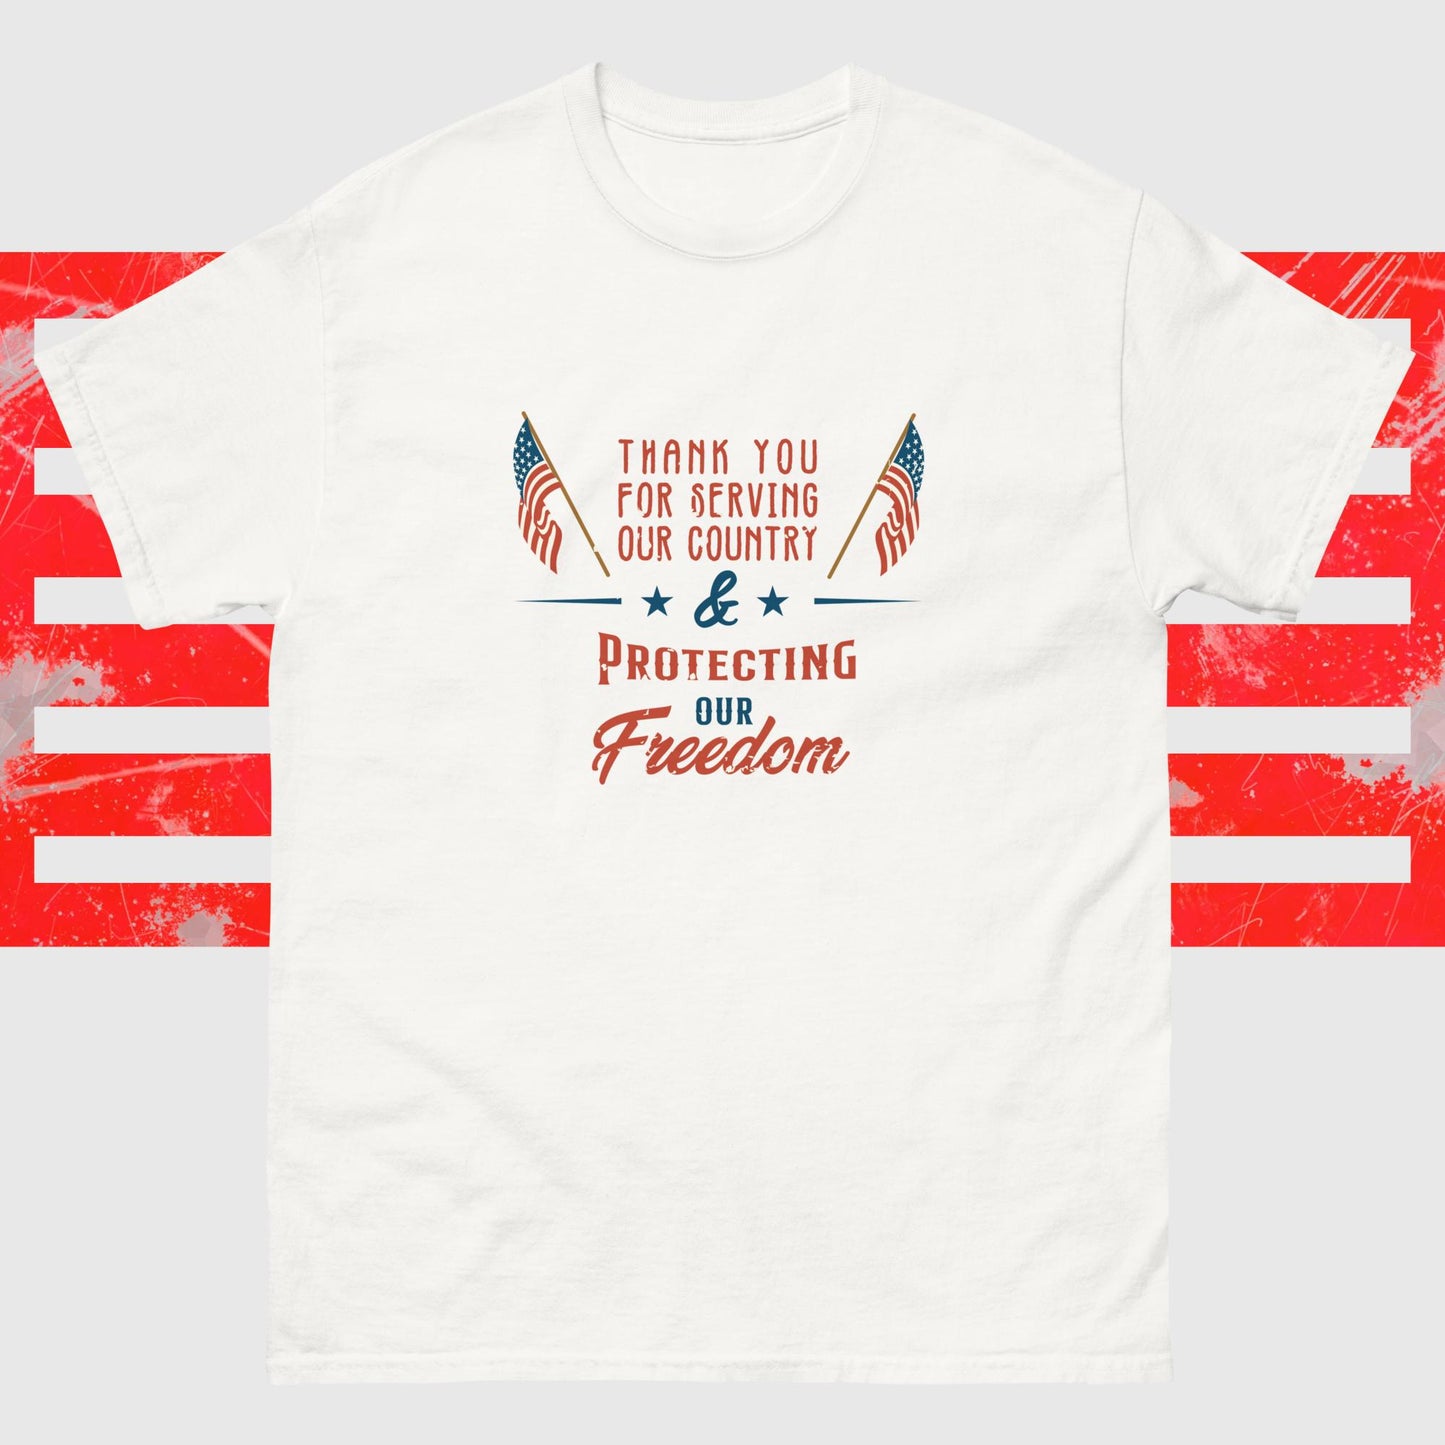 PATRIOTIC TEE FOR VETERANS DAY PROTECTING FREEDOM WHITE FRONT - www.firstamericanstore.com